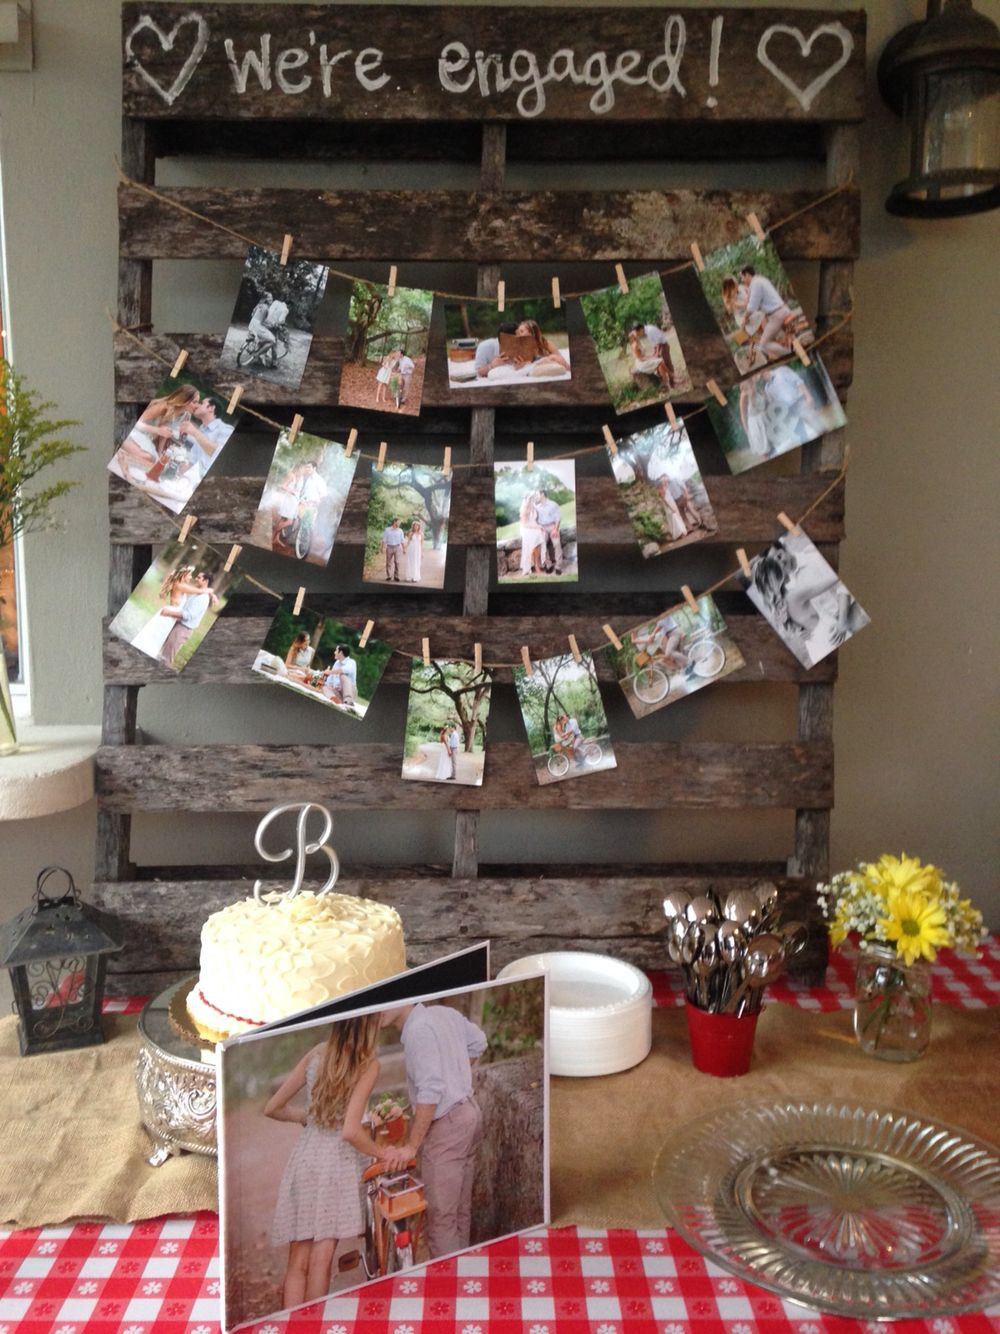 Engagement Party Theme Ideas
 I do BBQ … Engagement